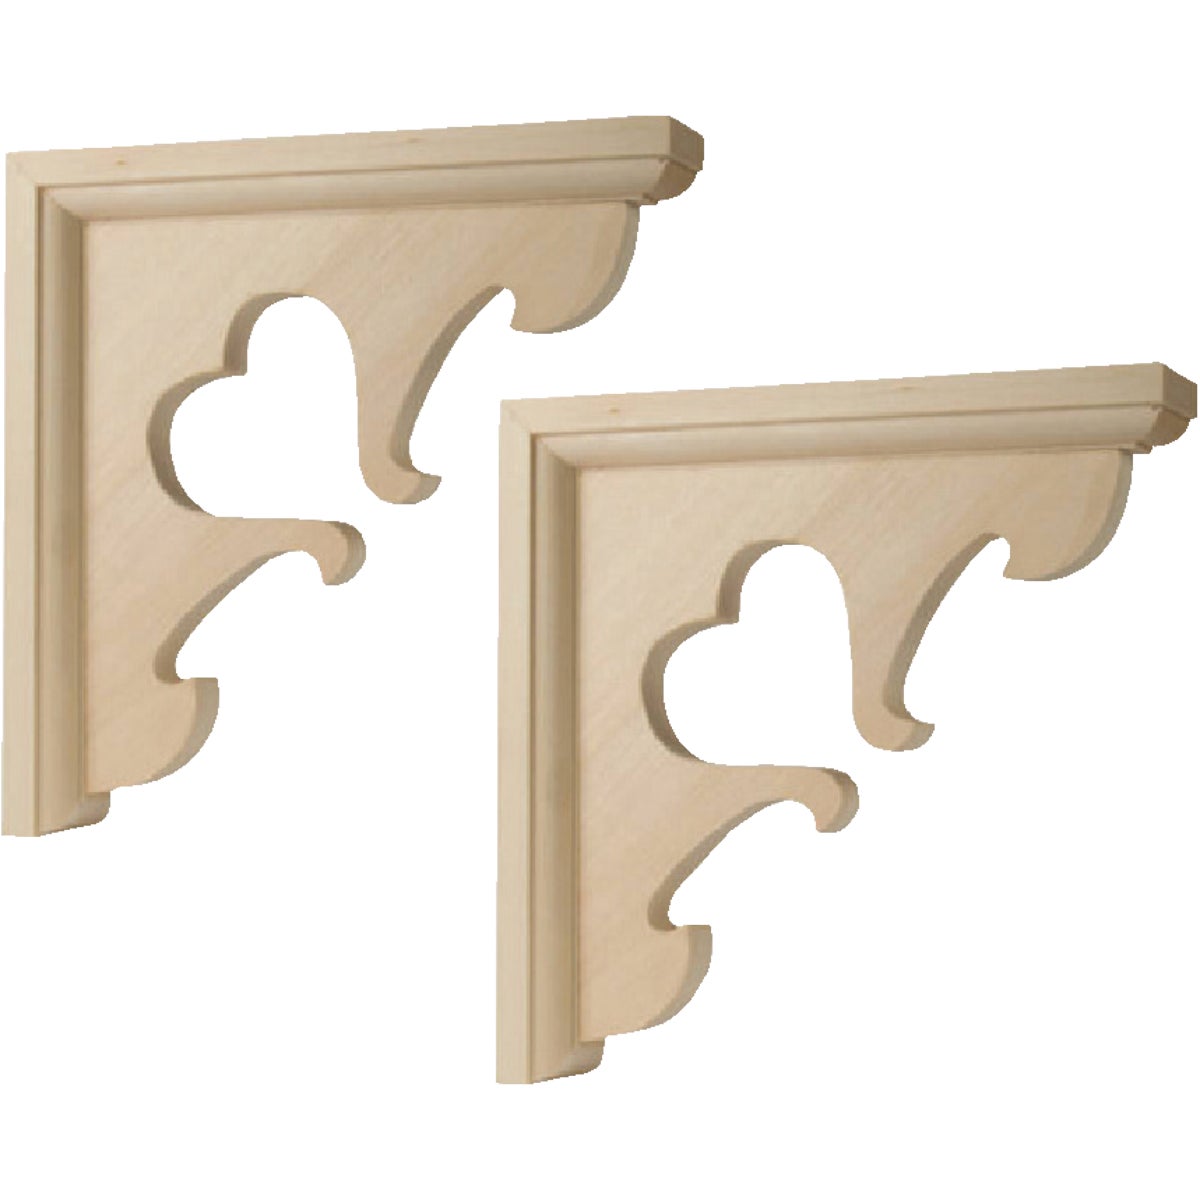 Item 250880, Decorative pine corbel. Keyhole mounting plate included.